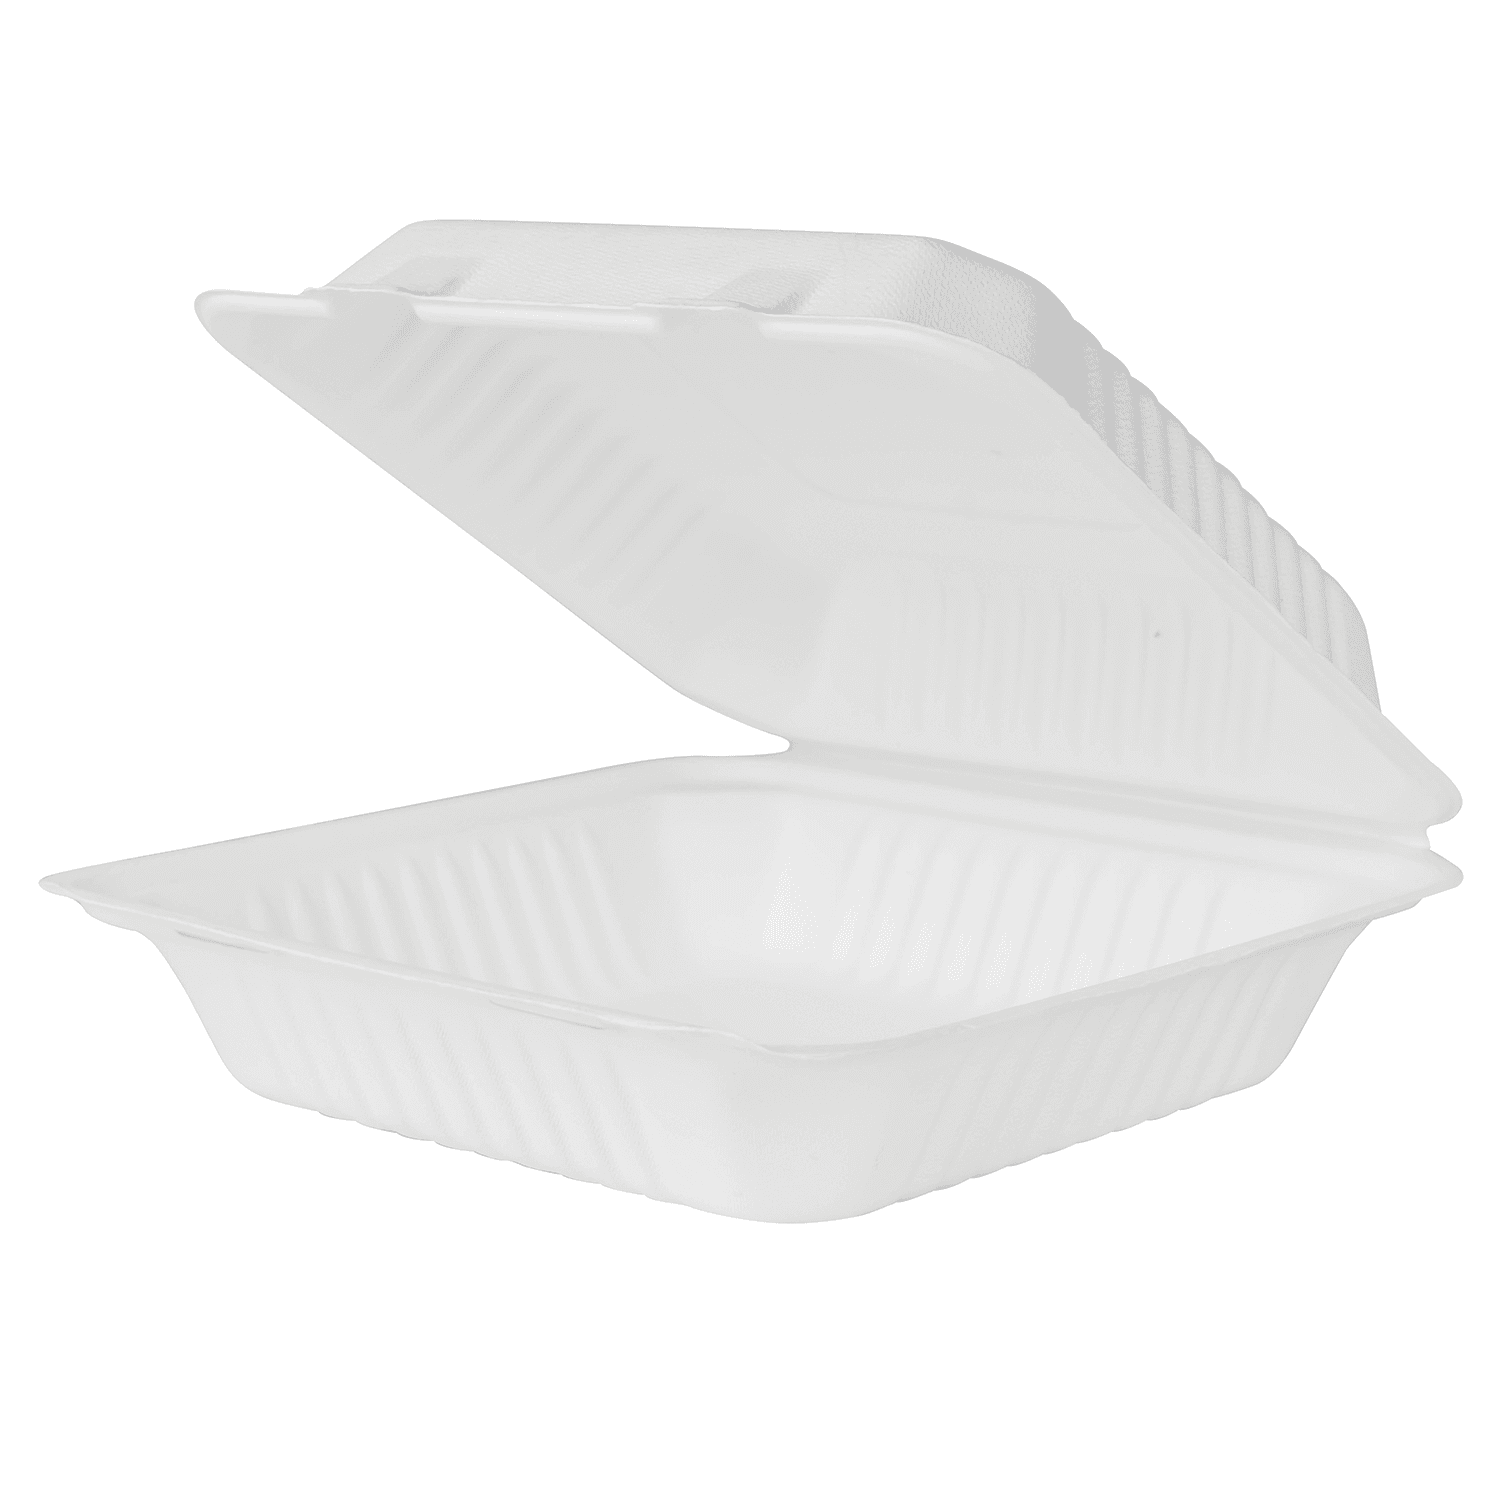 Karat Earth 9'' x 9'' PFAS Free Compostable Bagasse Hinged Containers, White - 200 pcs